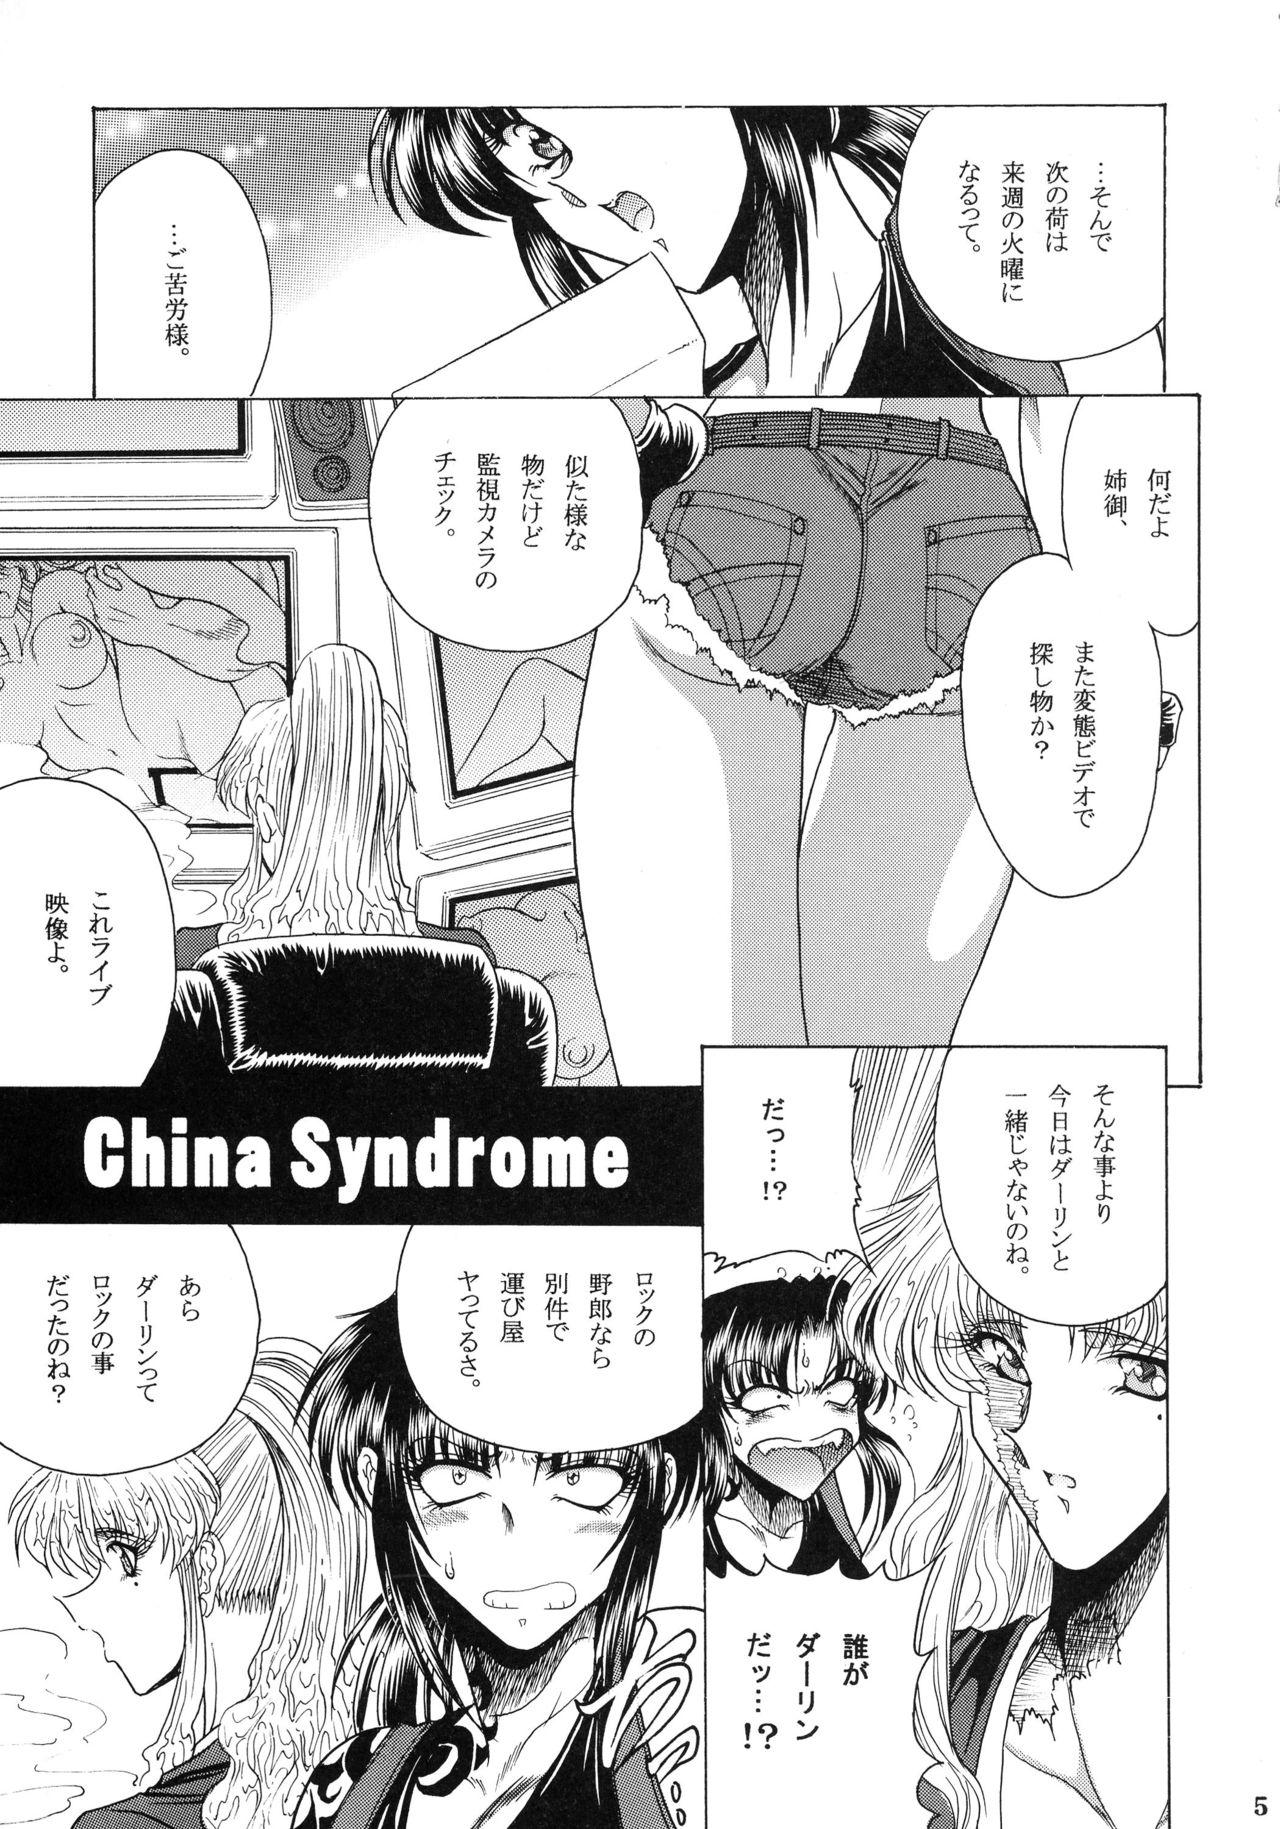 Best Blowjob ZONE 38 China Syndrome - Black lagoon Emo - Page 4